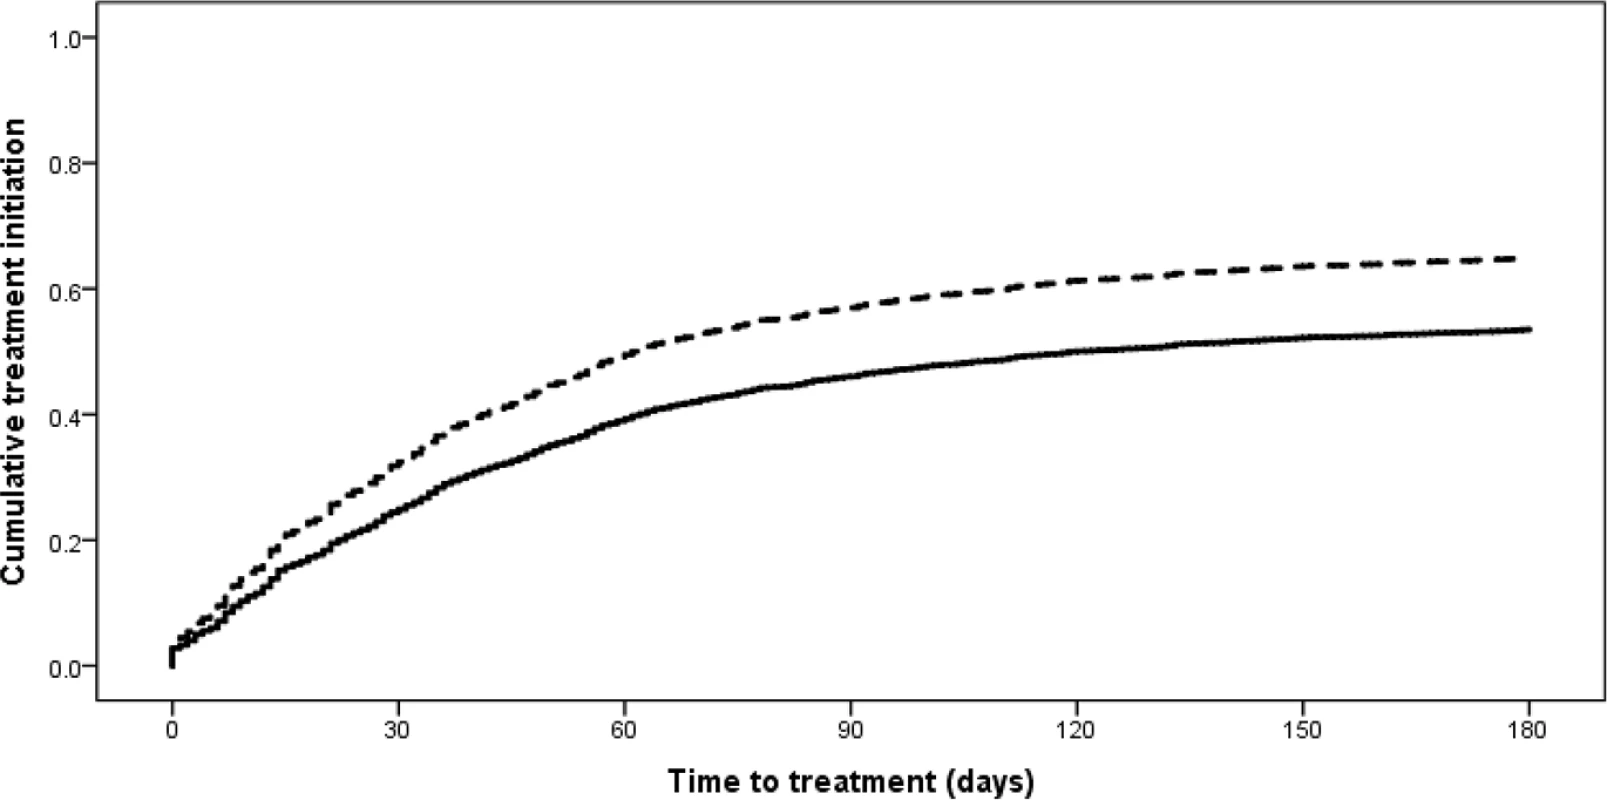 Time to treatment initiation from diagnostic specimen for new rifampicin-resistant tuberculosis patients from the 2011 and 2013 cohorts (<i>p &lt;</i> 0.001).